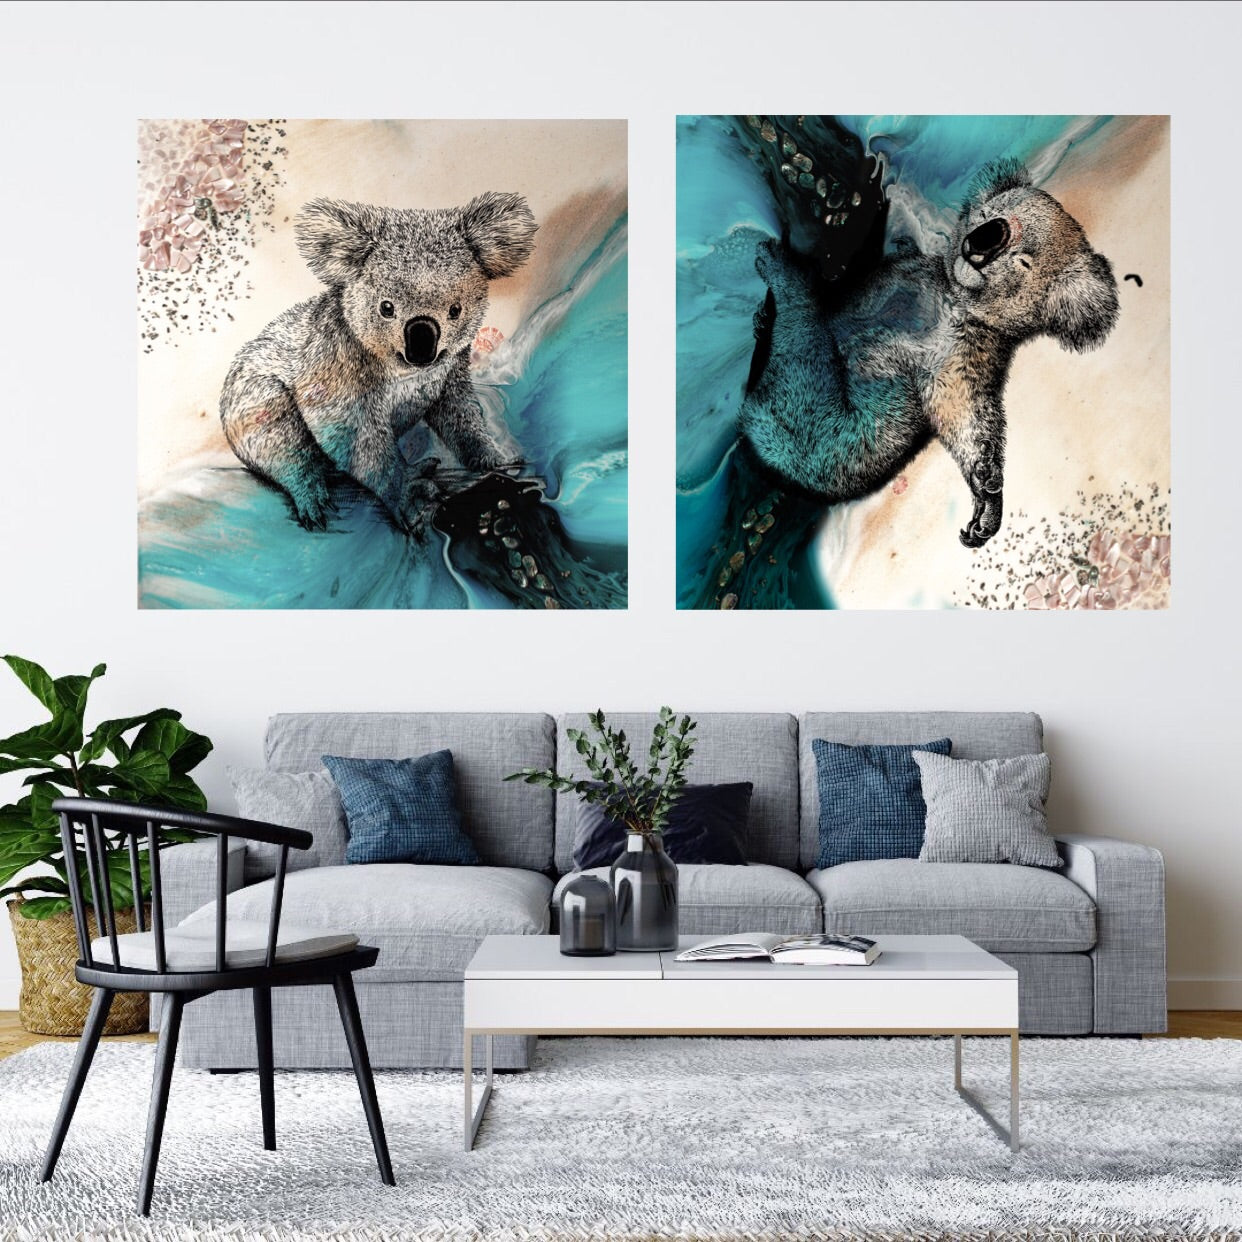 Abstract Ocean. Blue beach with Koala. Art Print. Antuanelle 2 Print for WWF Koala Conservation. Limited Edition